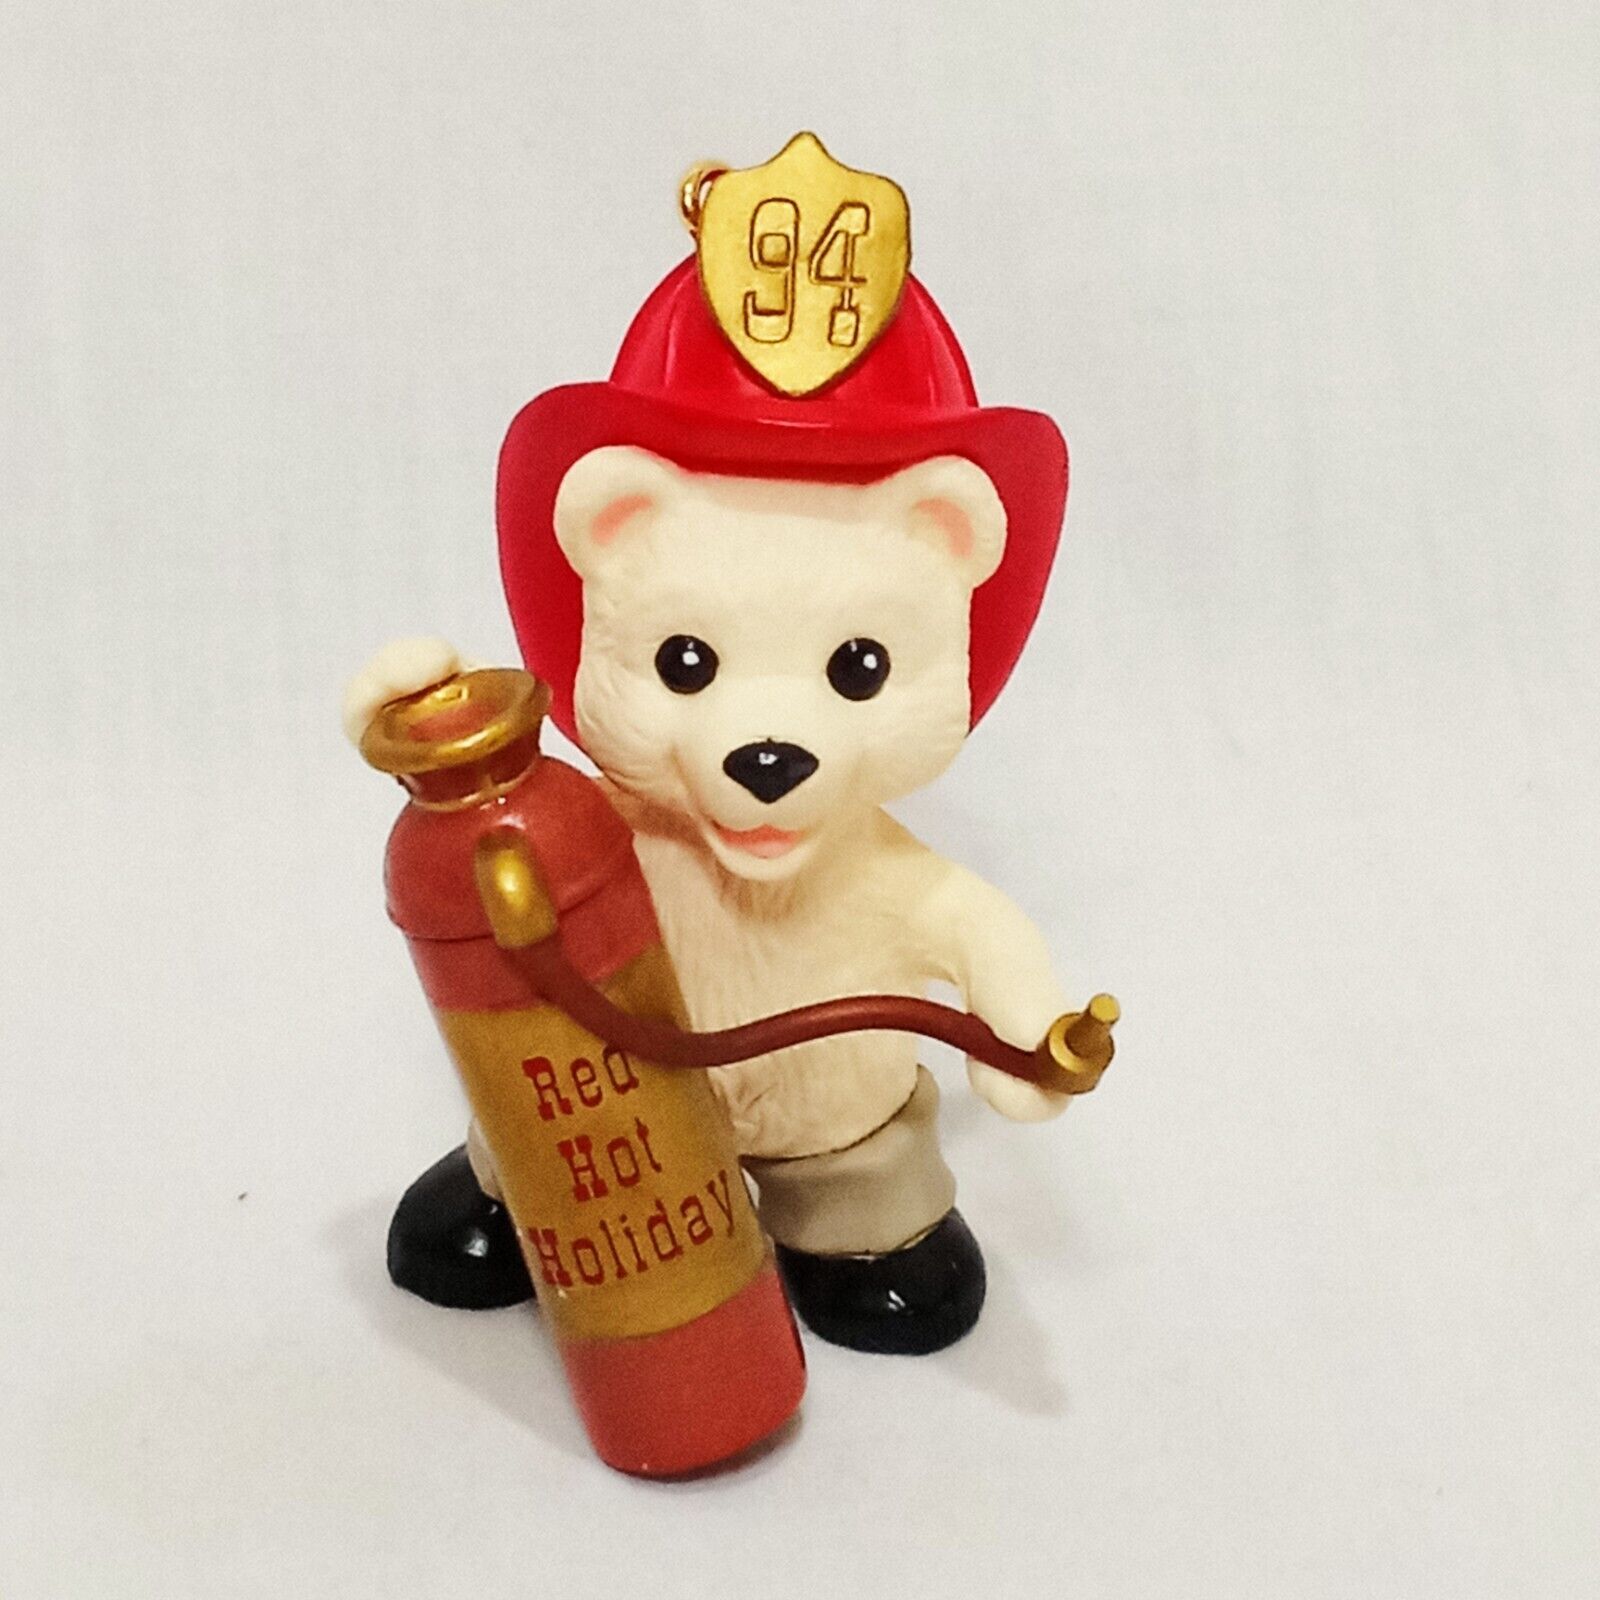 Primary image for Red Hot Holiday Bear Fireman Fire Extinguish Christmas Ornament 1996 3" Hallmark